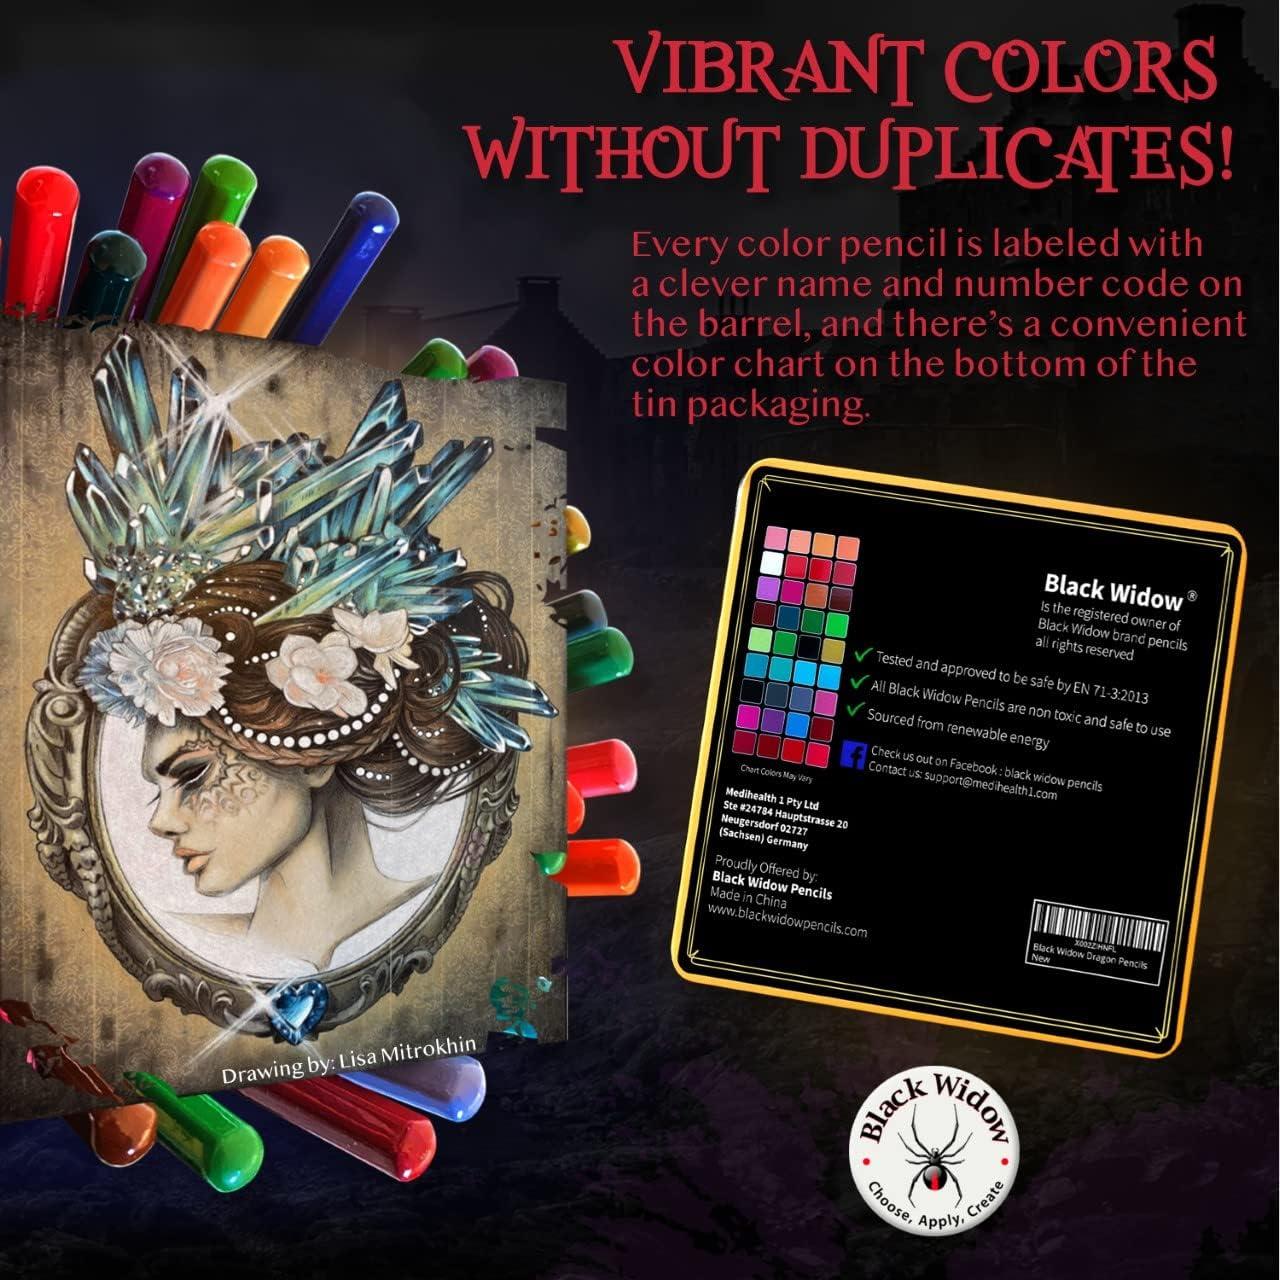  Black Widow Dragon Colored Pencils For Adult Coloring - 36  Coloring Pencils With Smooth Pigments - Best Color Pencil Set For Adult  Coloring Books And Drawing : Arts, Crafts & Sewing